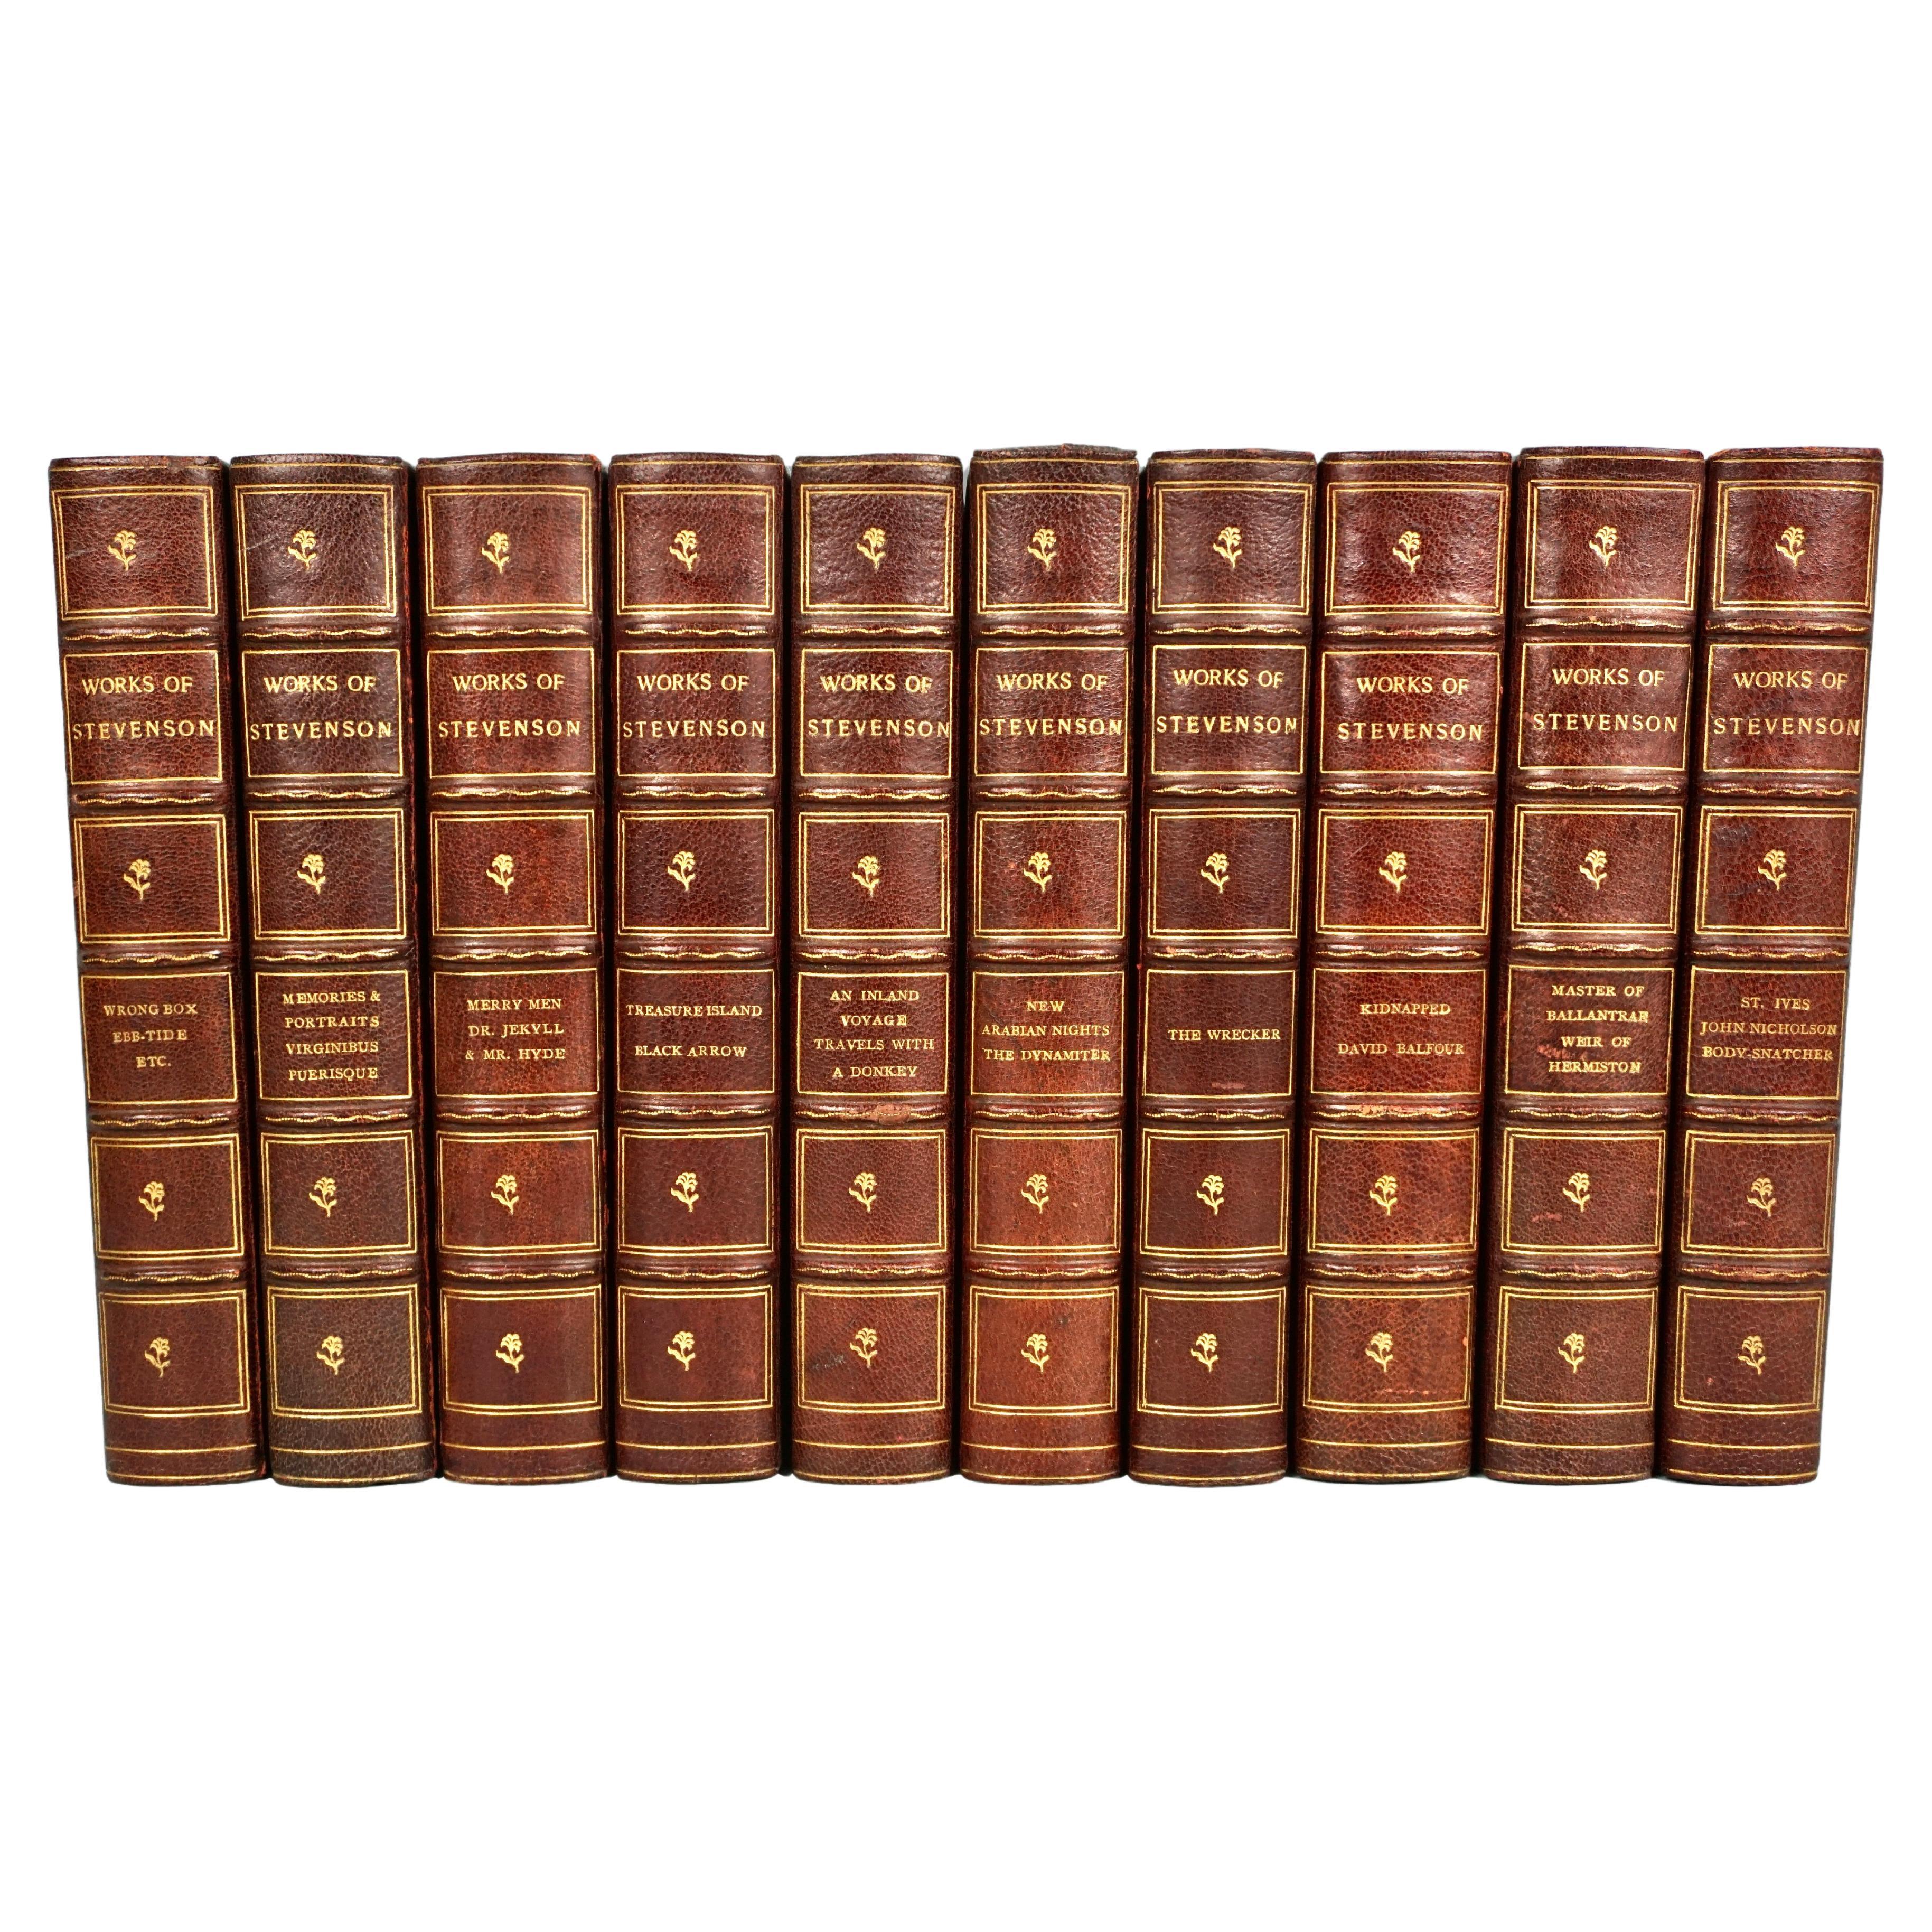 Fine Leatherbound Set of Stevenson's Works in 10 Volumes with Gilt Spines